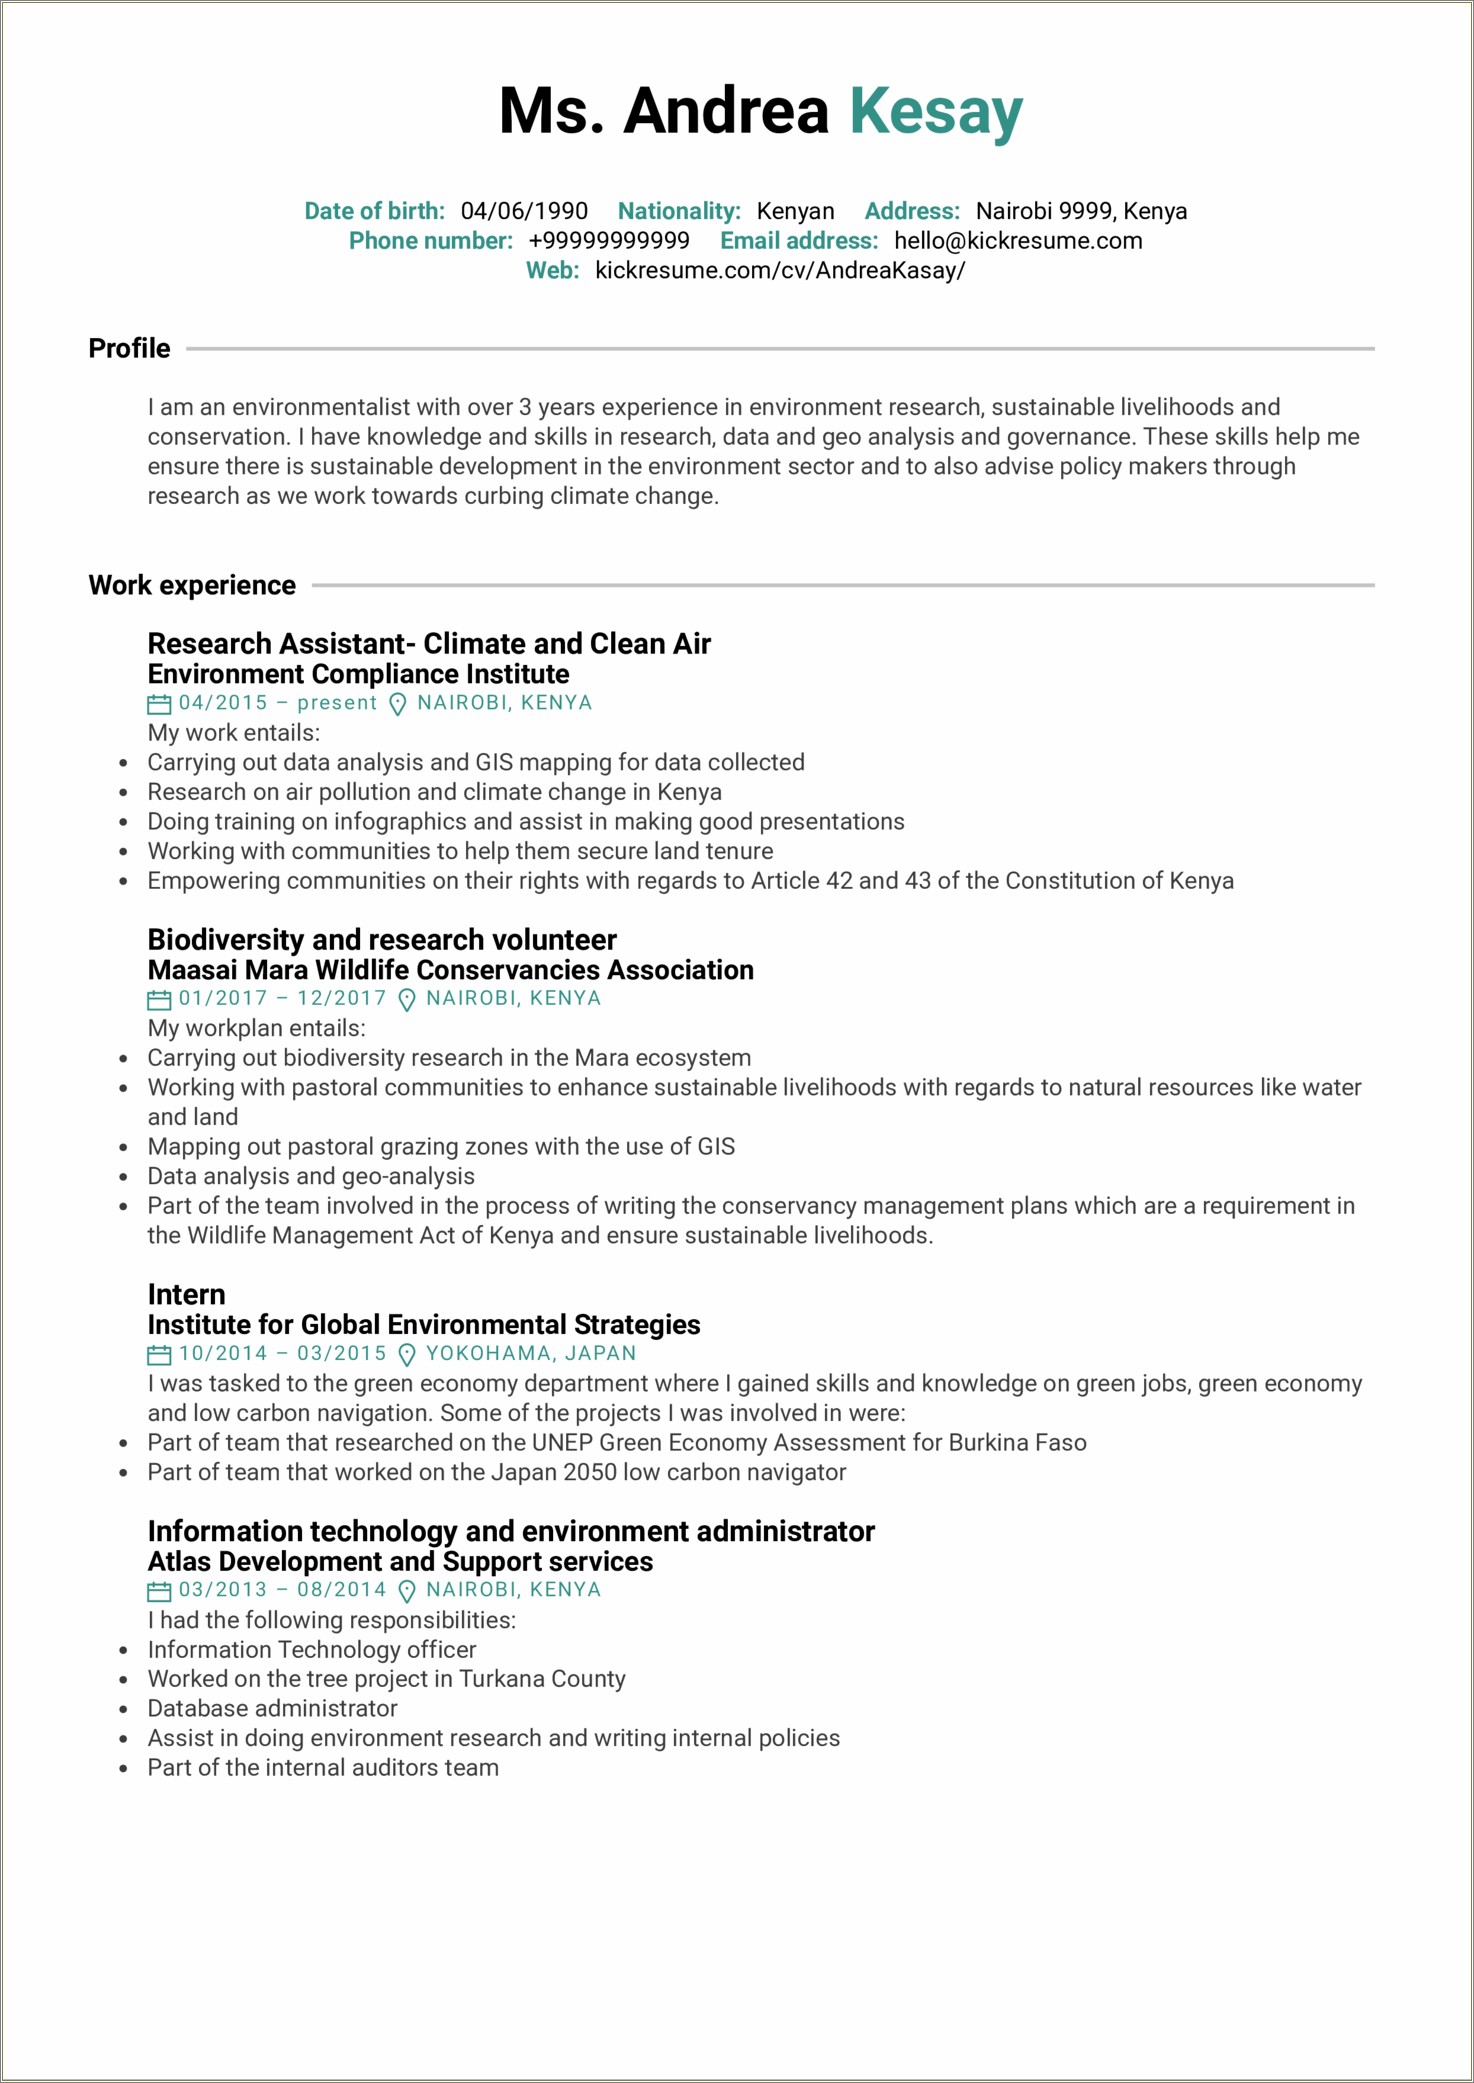 Resume Examples For Document Research Assistant